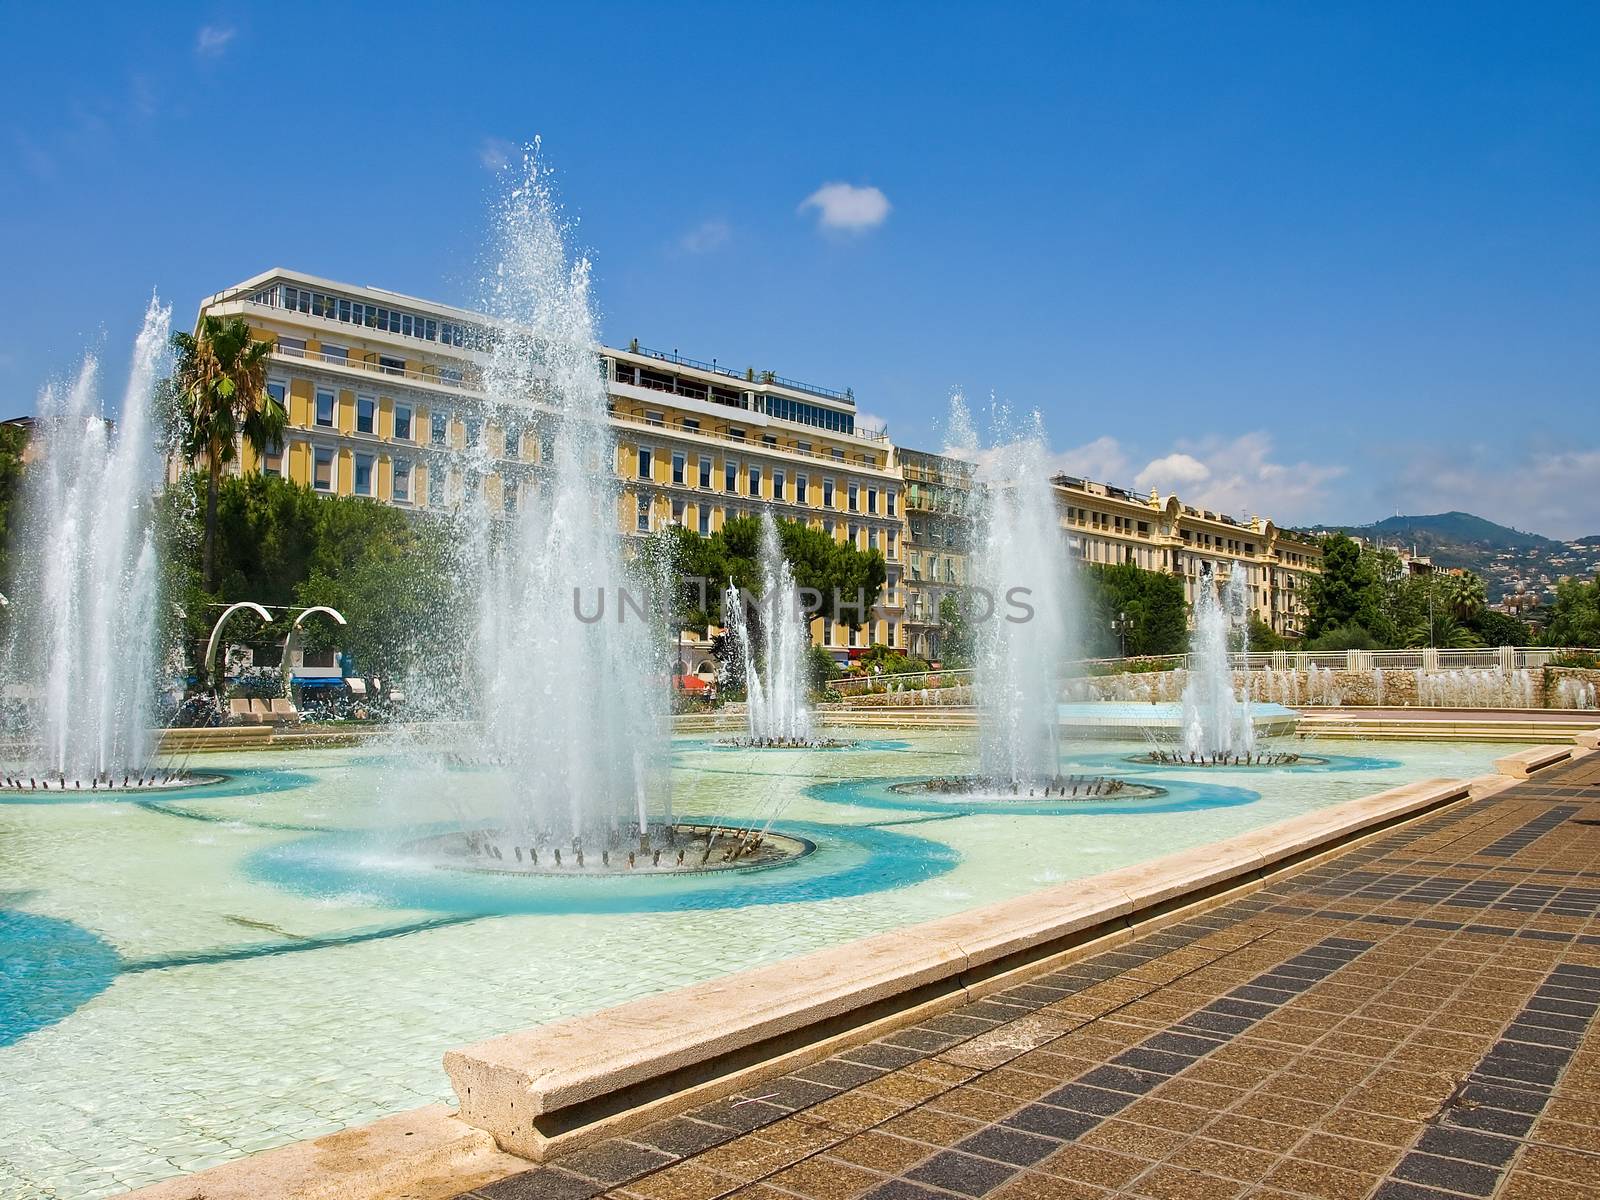 Fountains at Plaza Massena Square in the city of Nice, France